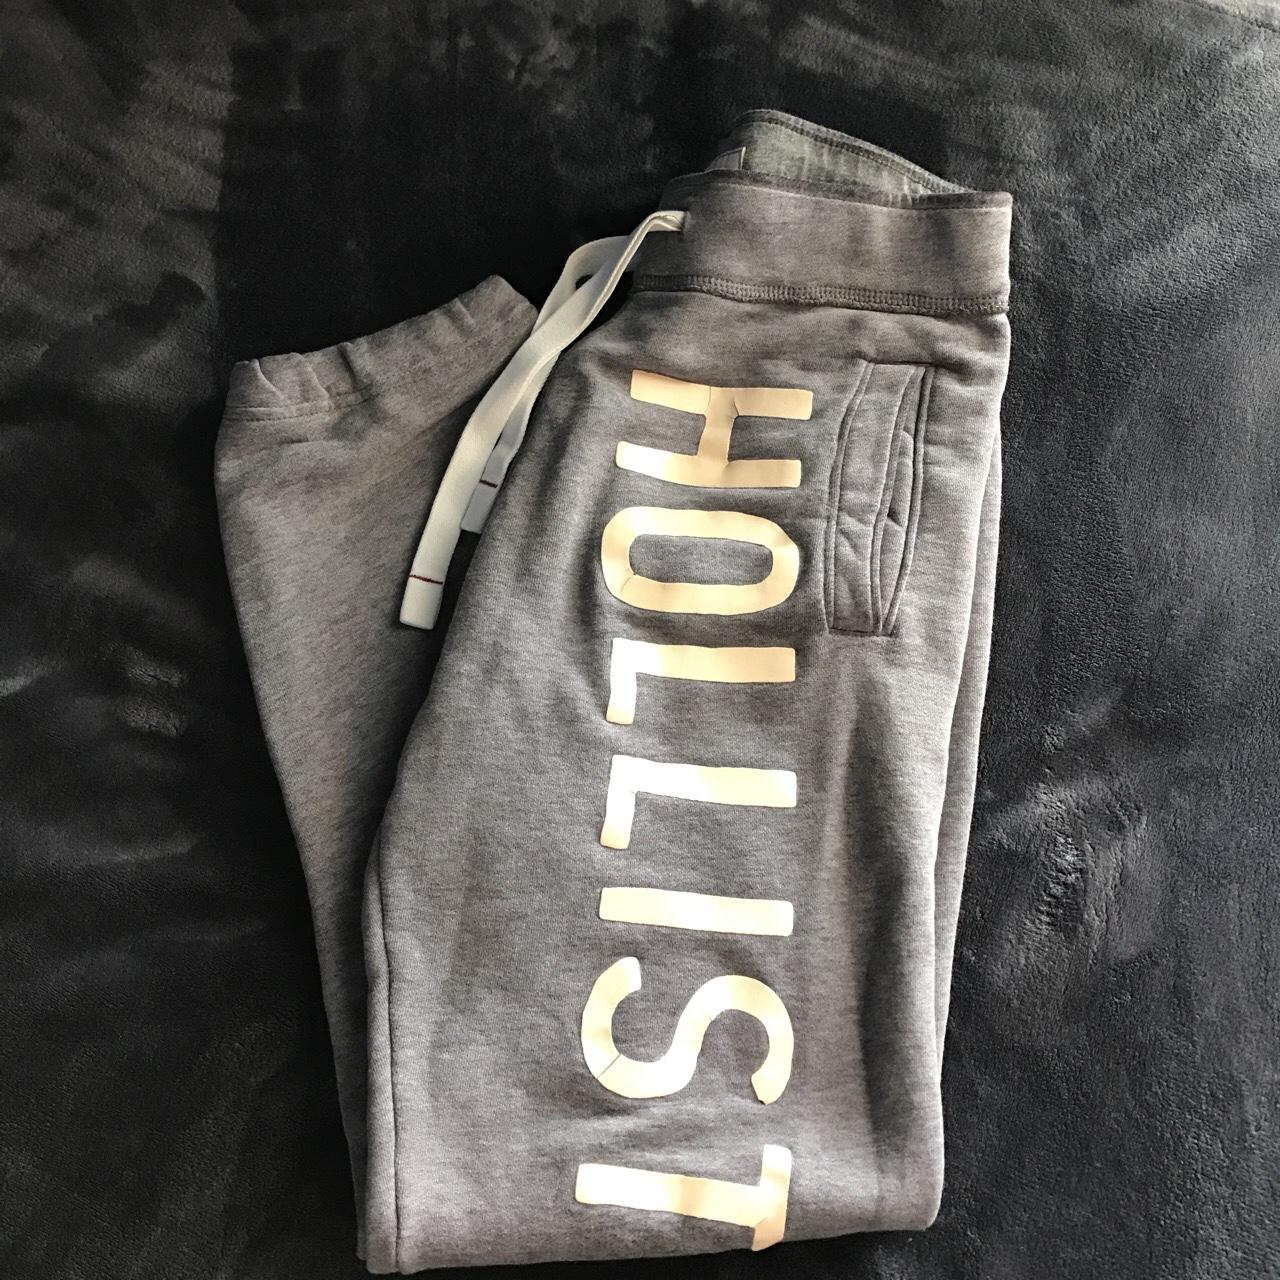 A pair of grey hollister sweatpants in a men's size - Depop